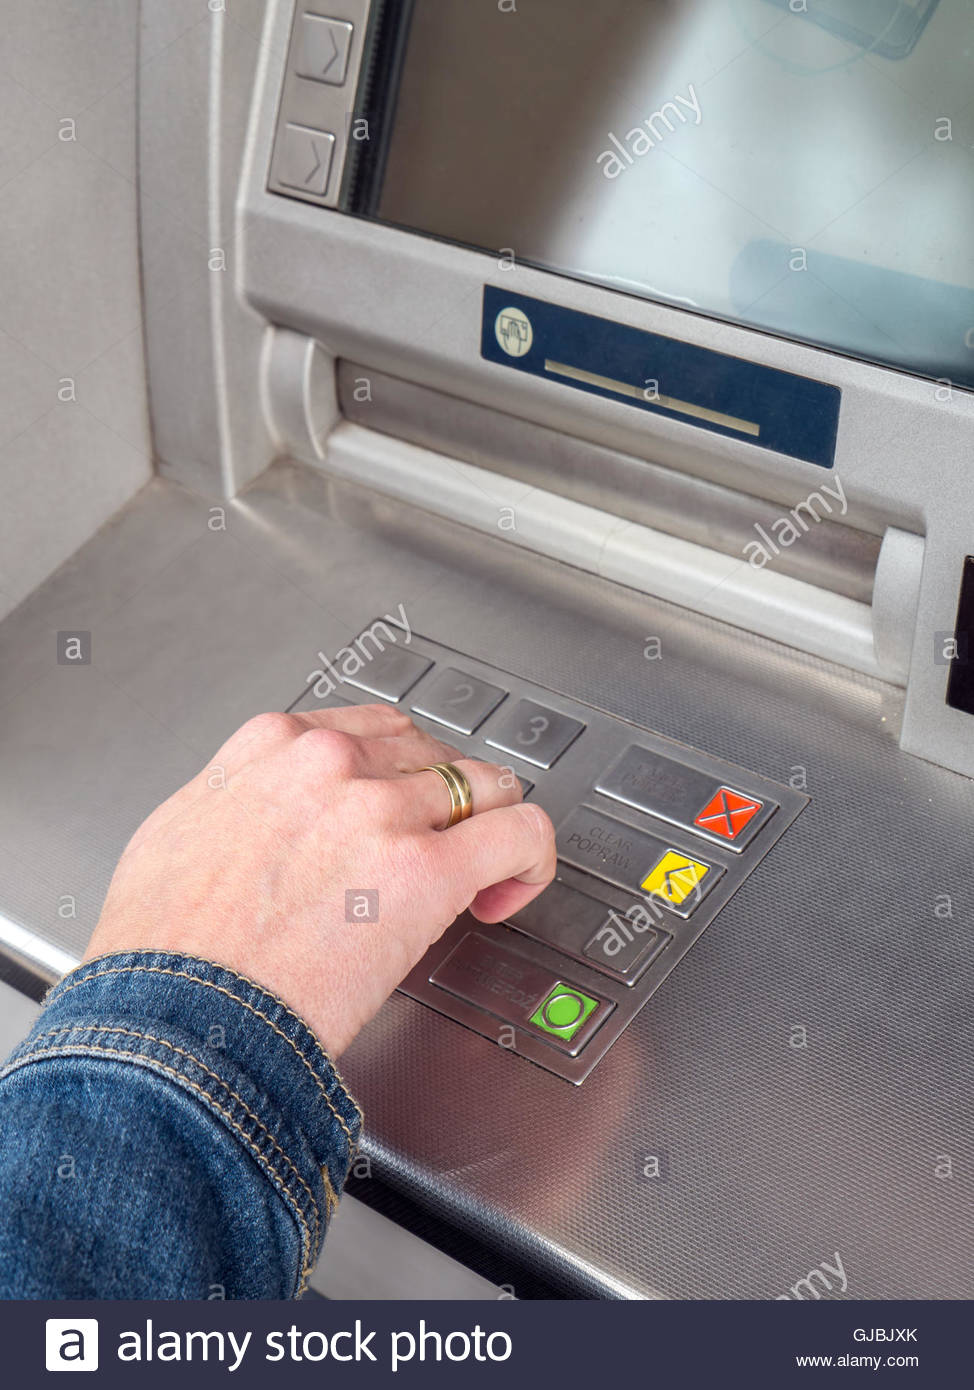 codes to override atm machines